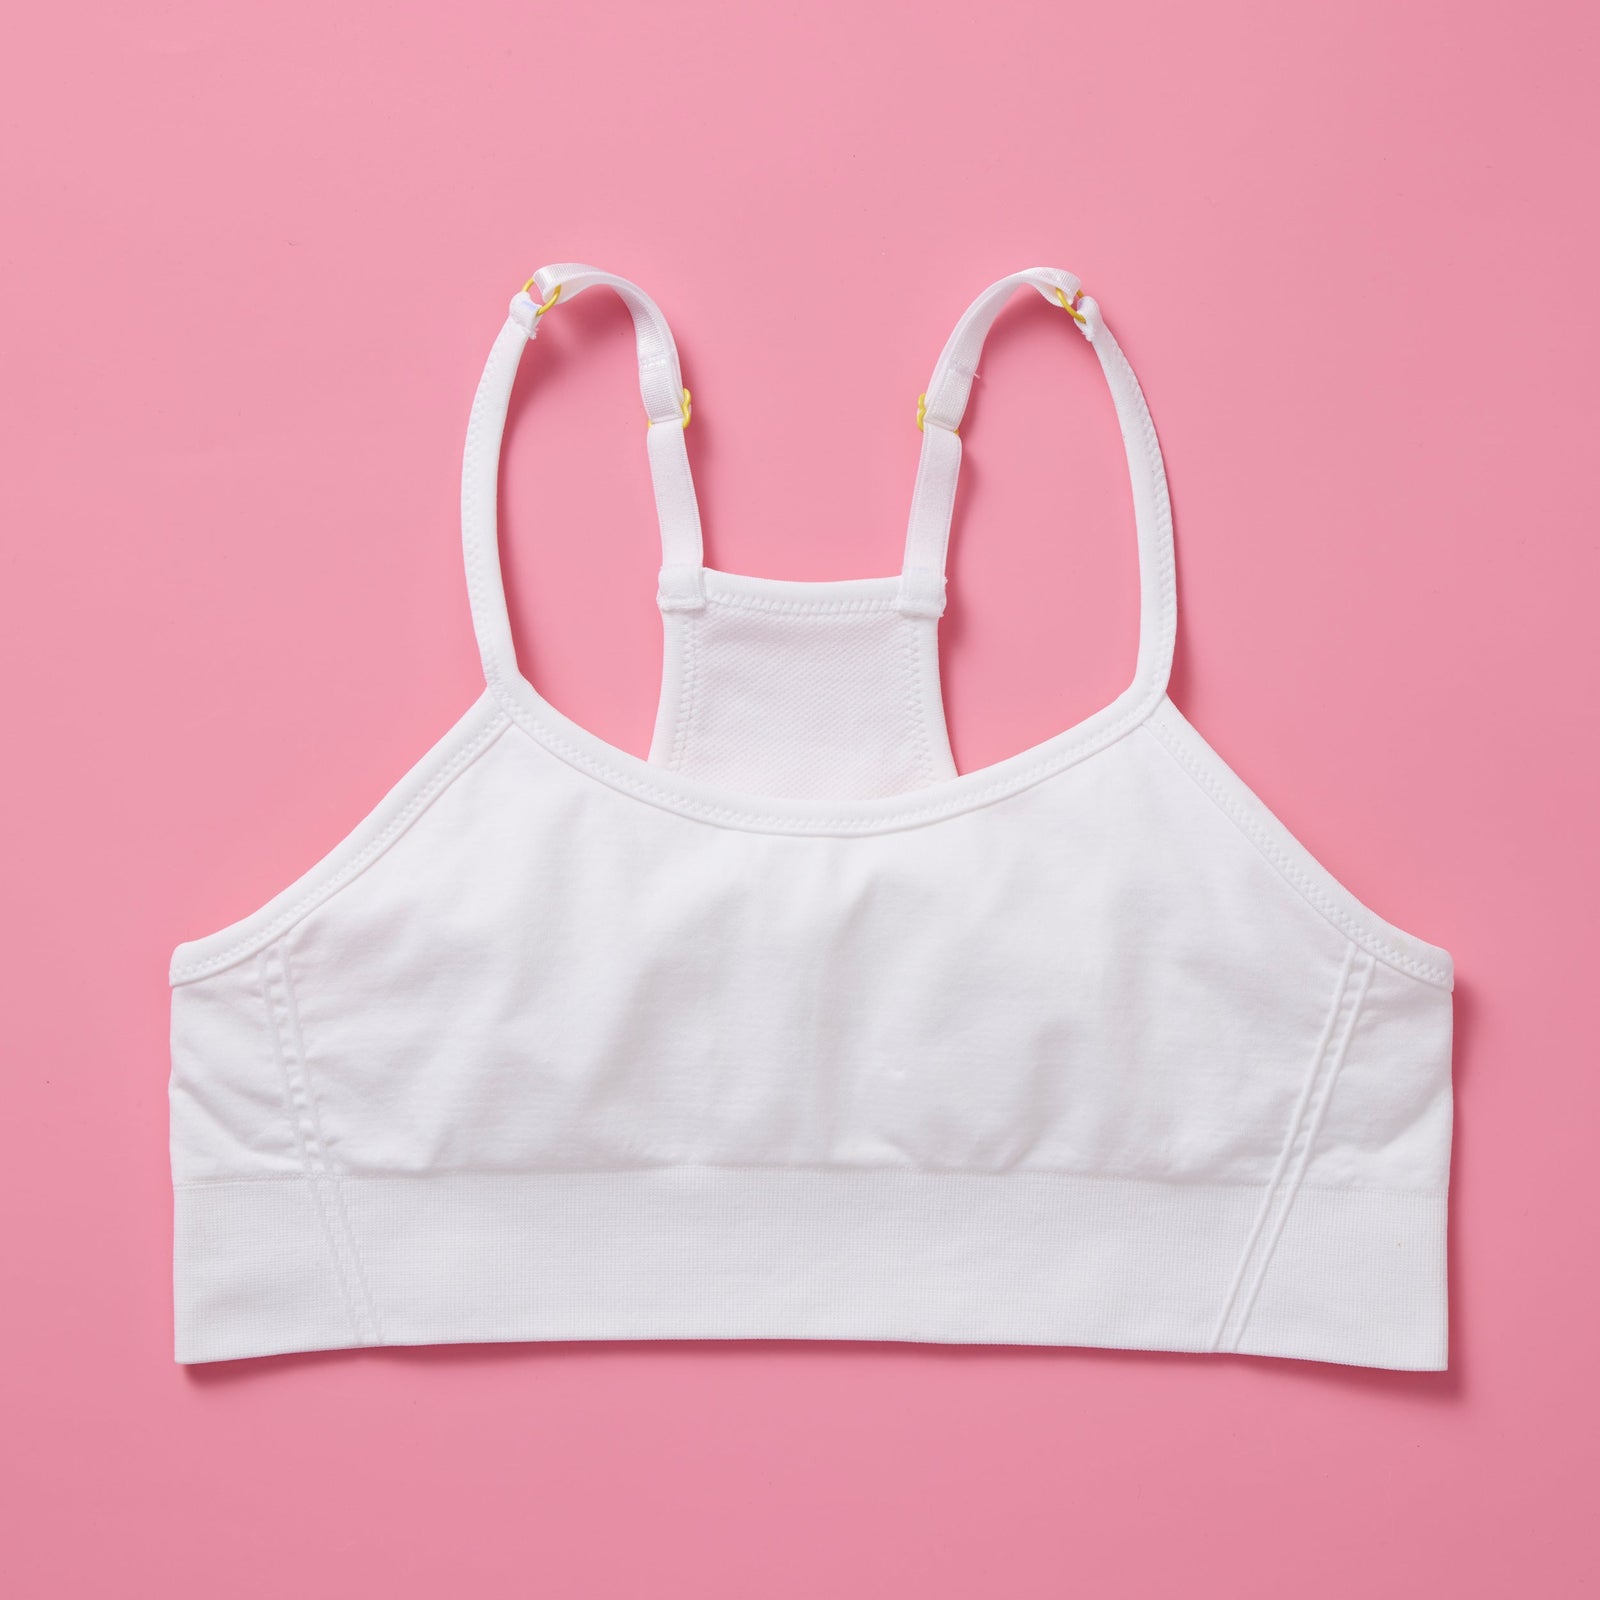 Adorable Embroidered First Pima Cotton Training Bra for Girls by  Yellowberry - X Small, White Marshmallow